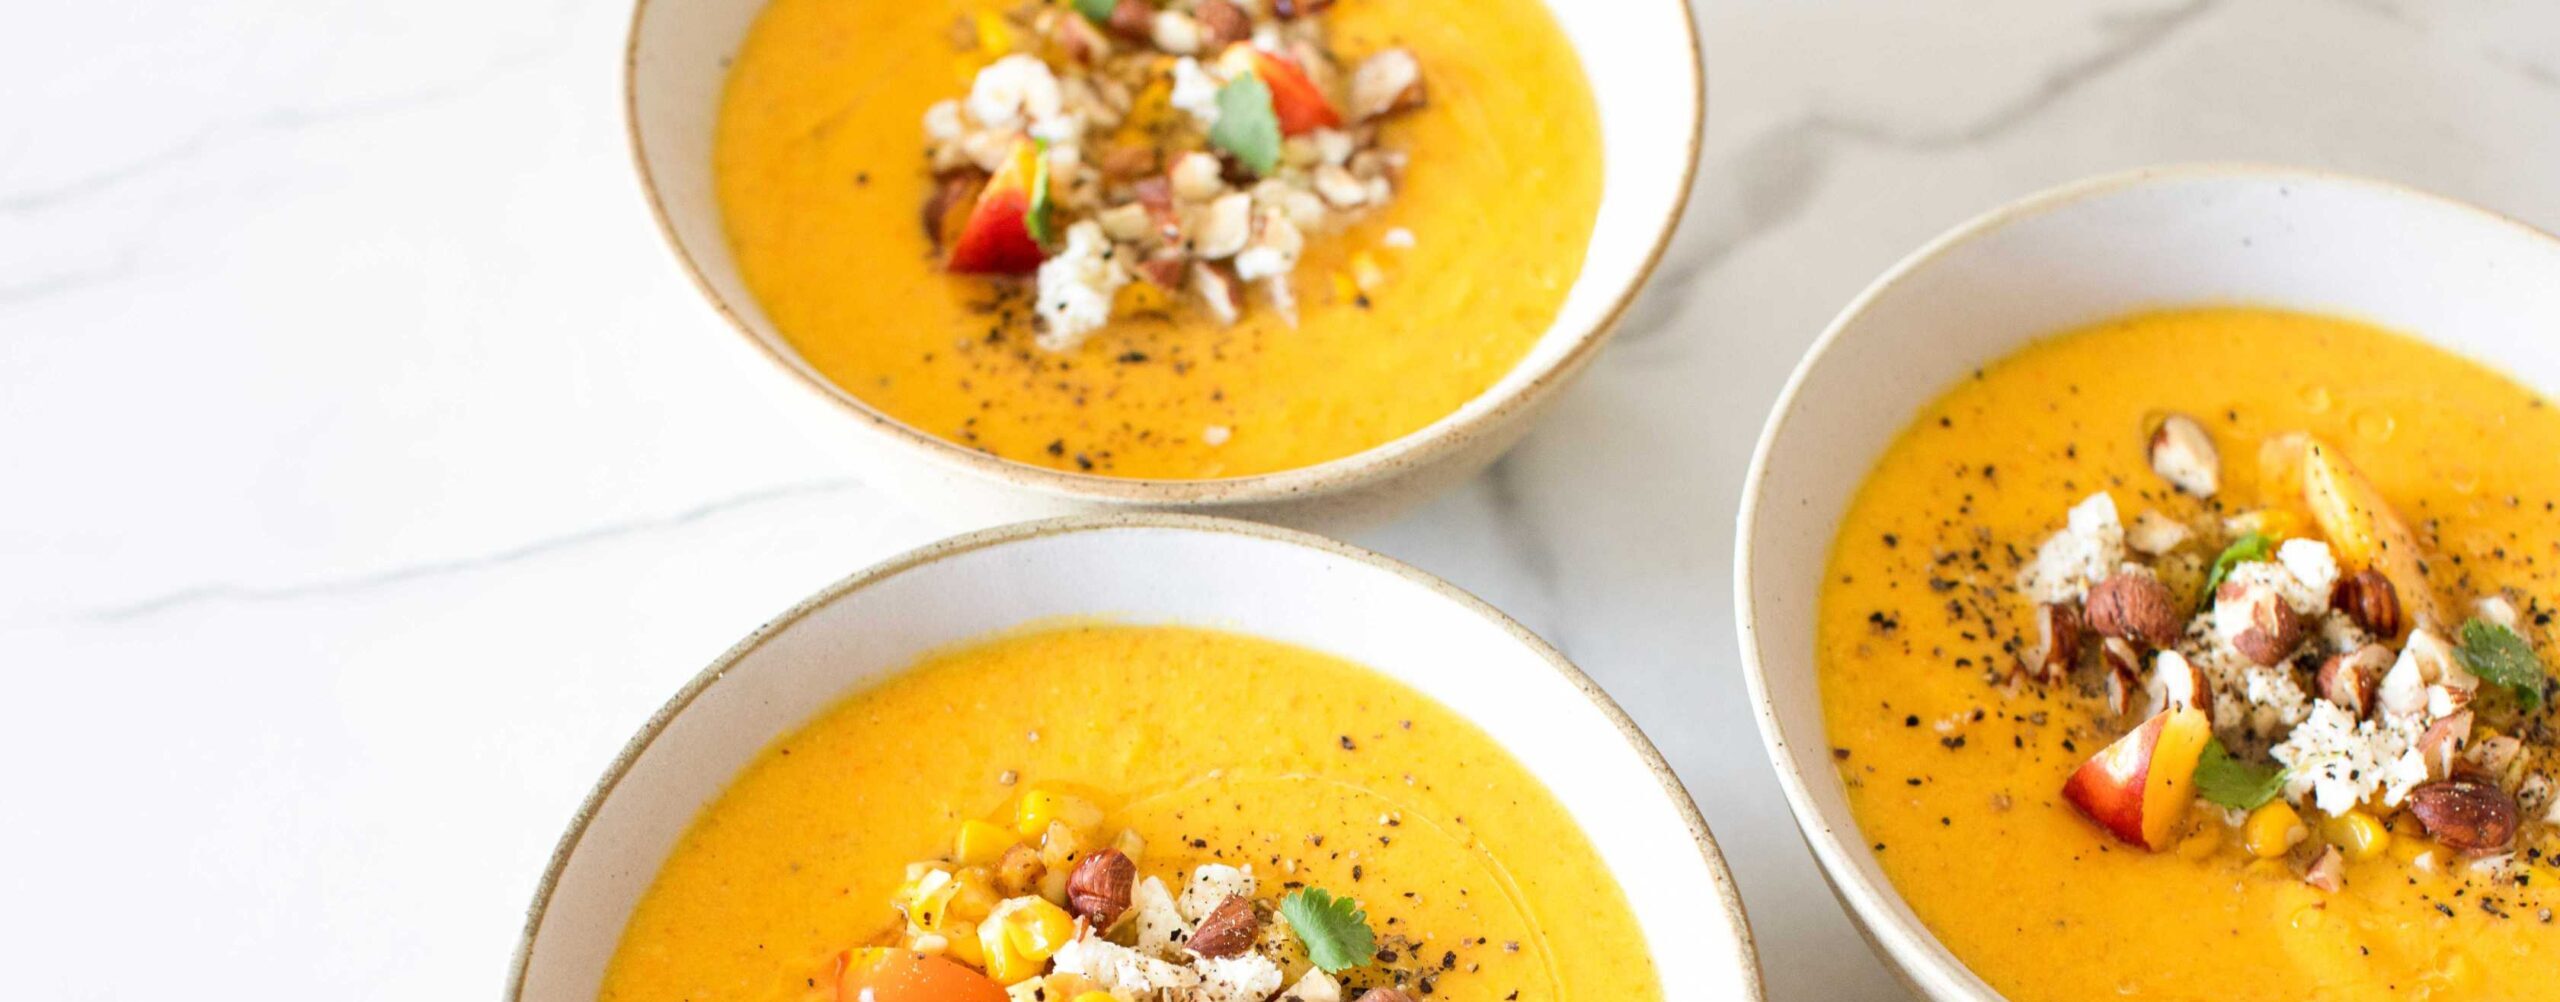 Three bowls of orange soup with colorful accompanments in middle of bowl